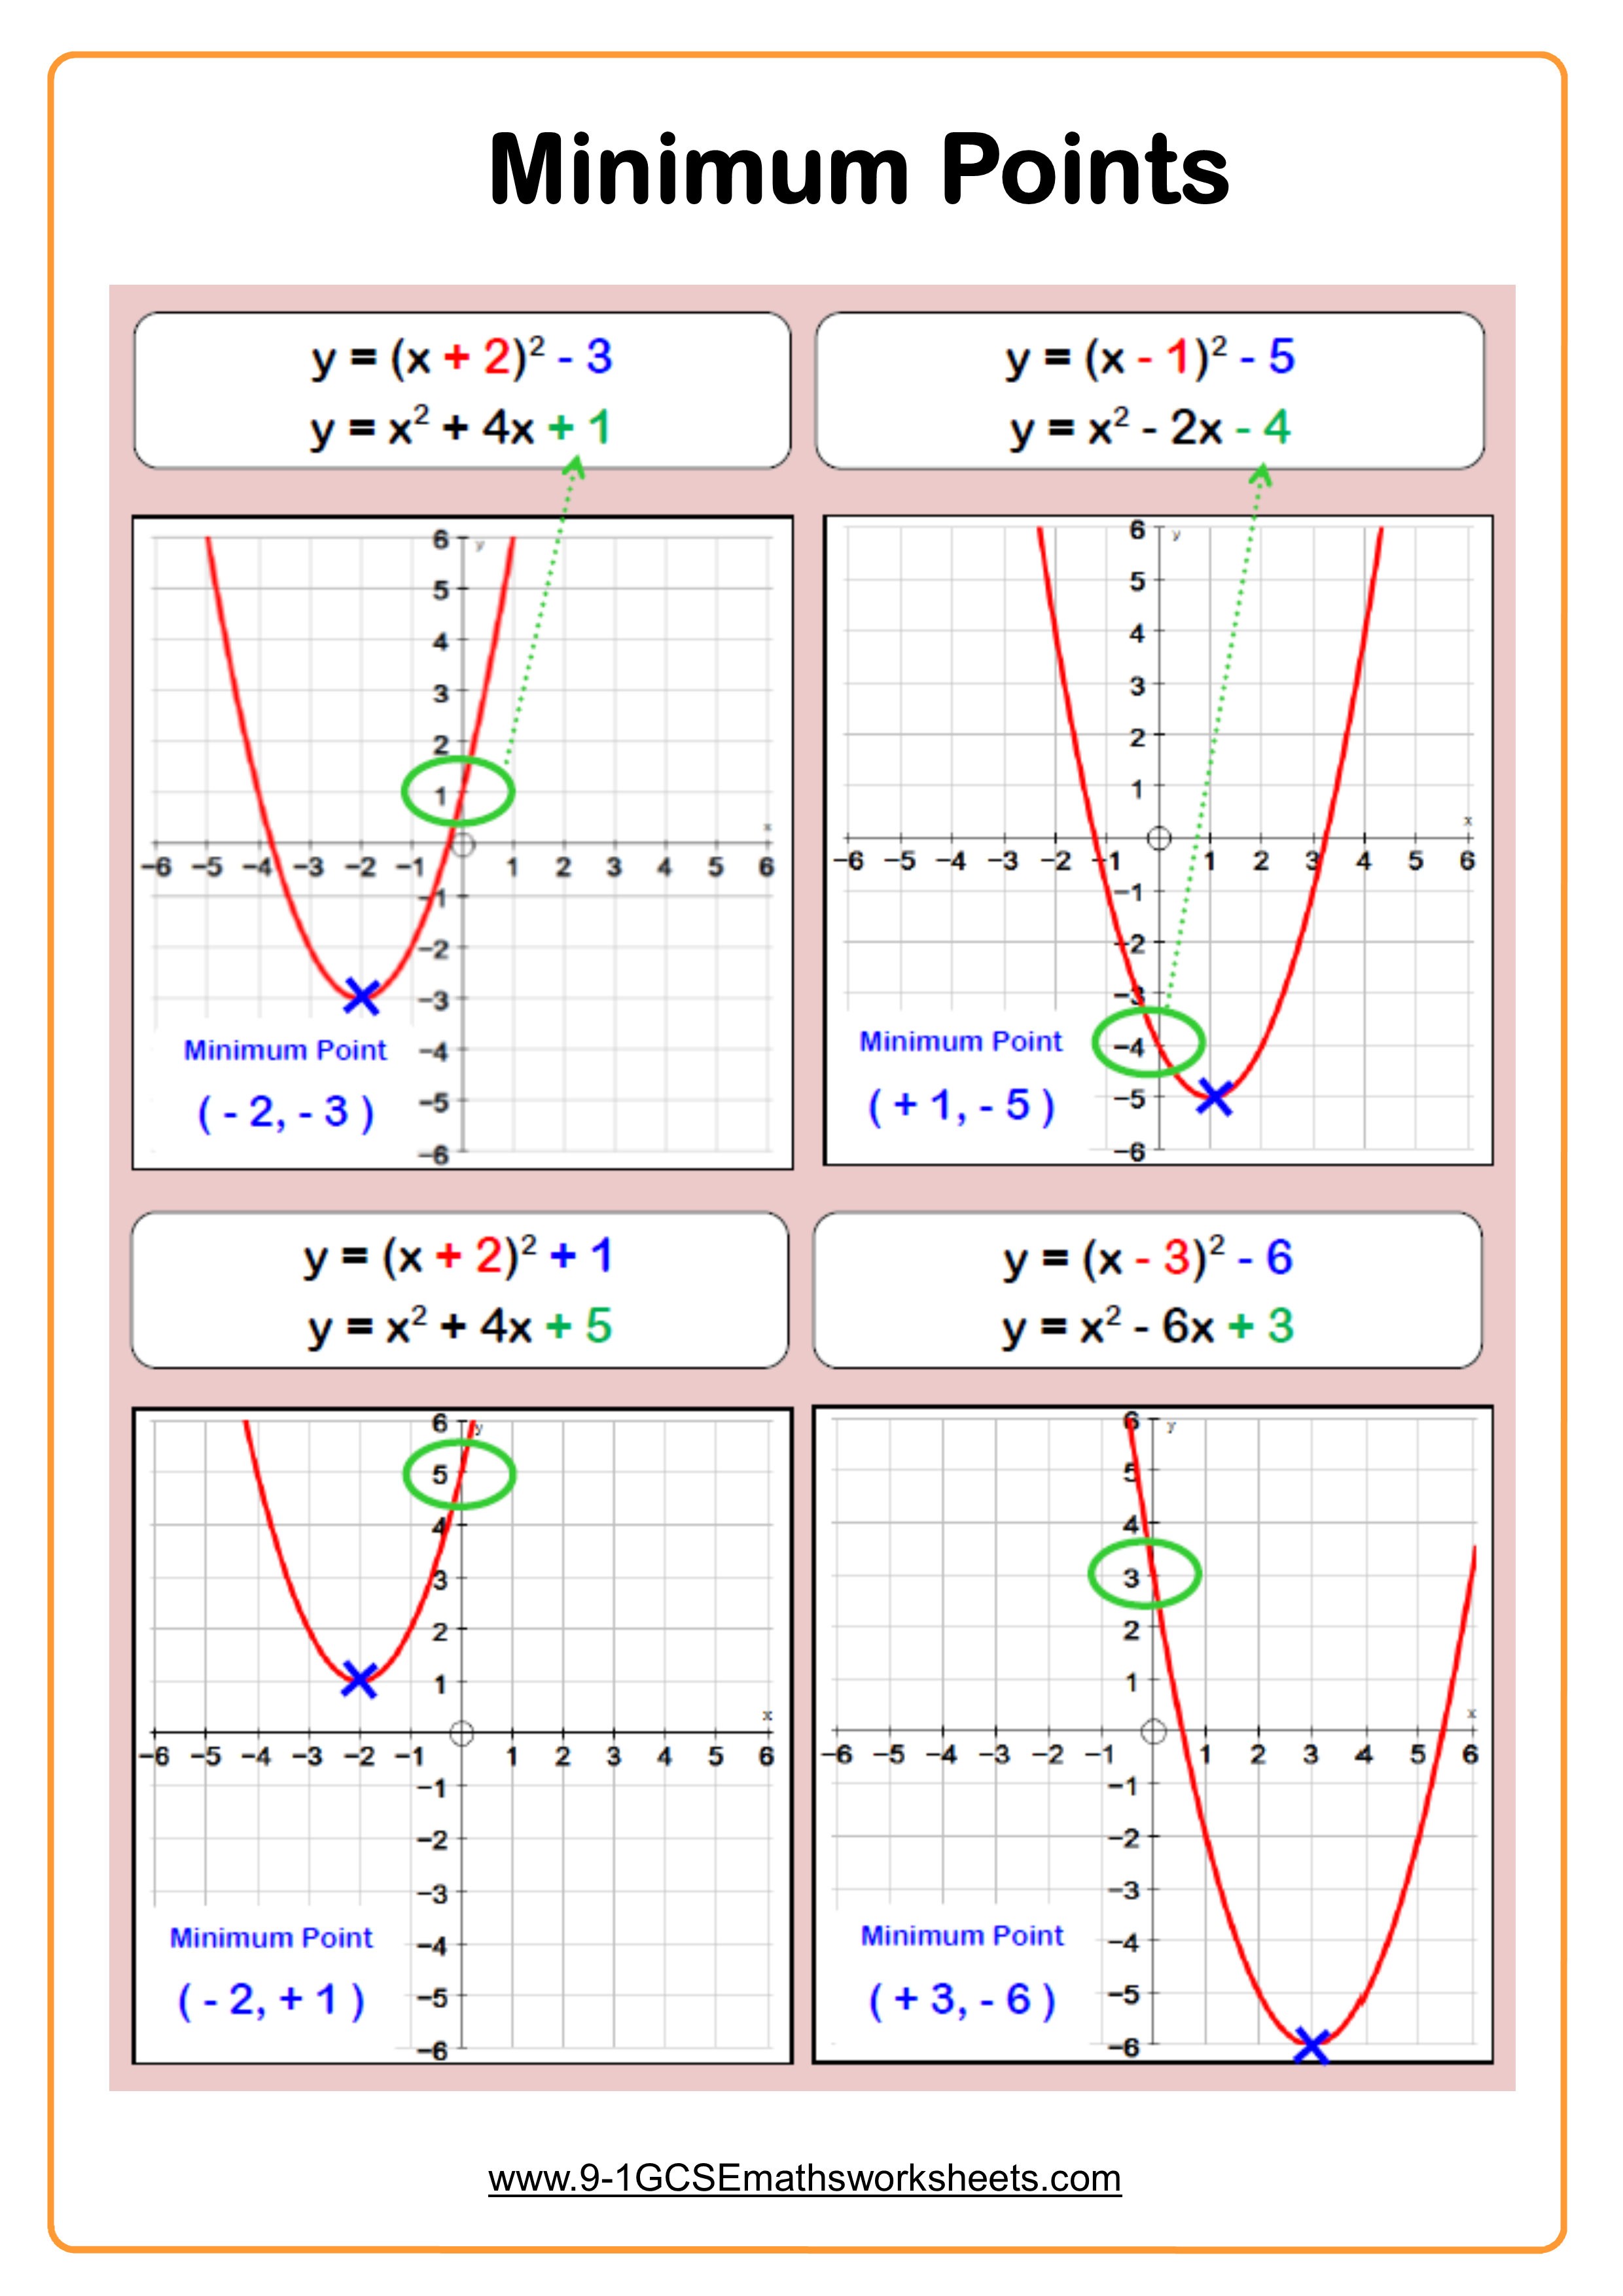 Quadratic Graphs Worksheets Practice Questions And Answers Cazoomy